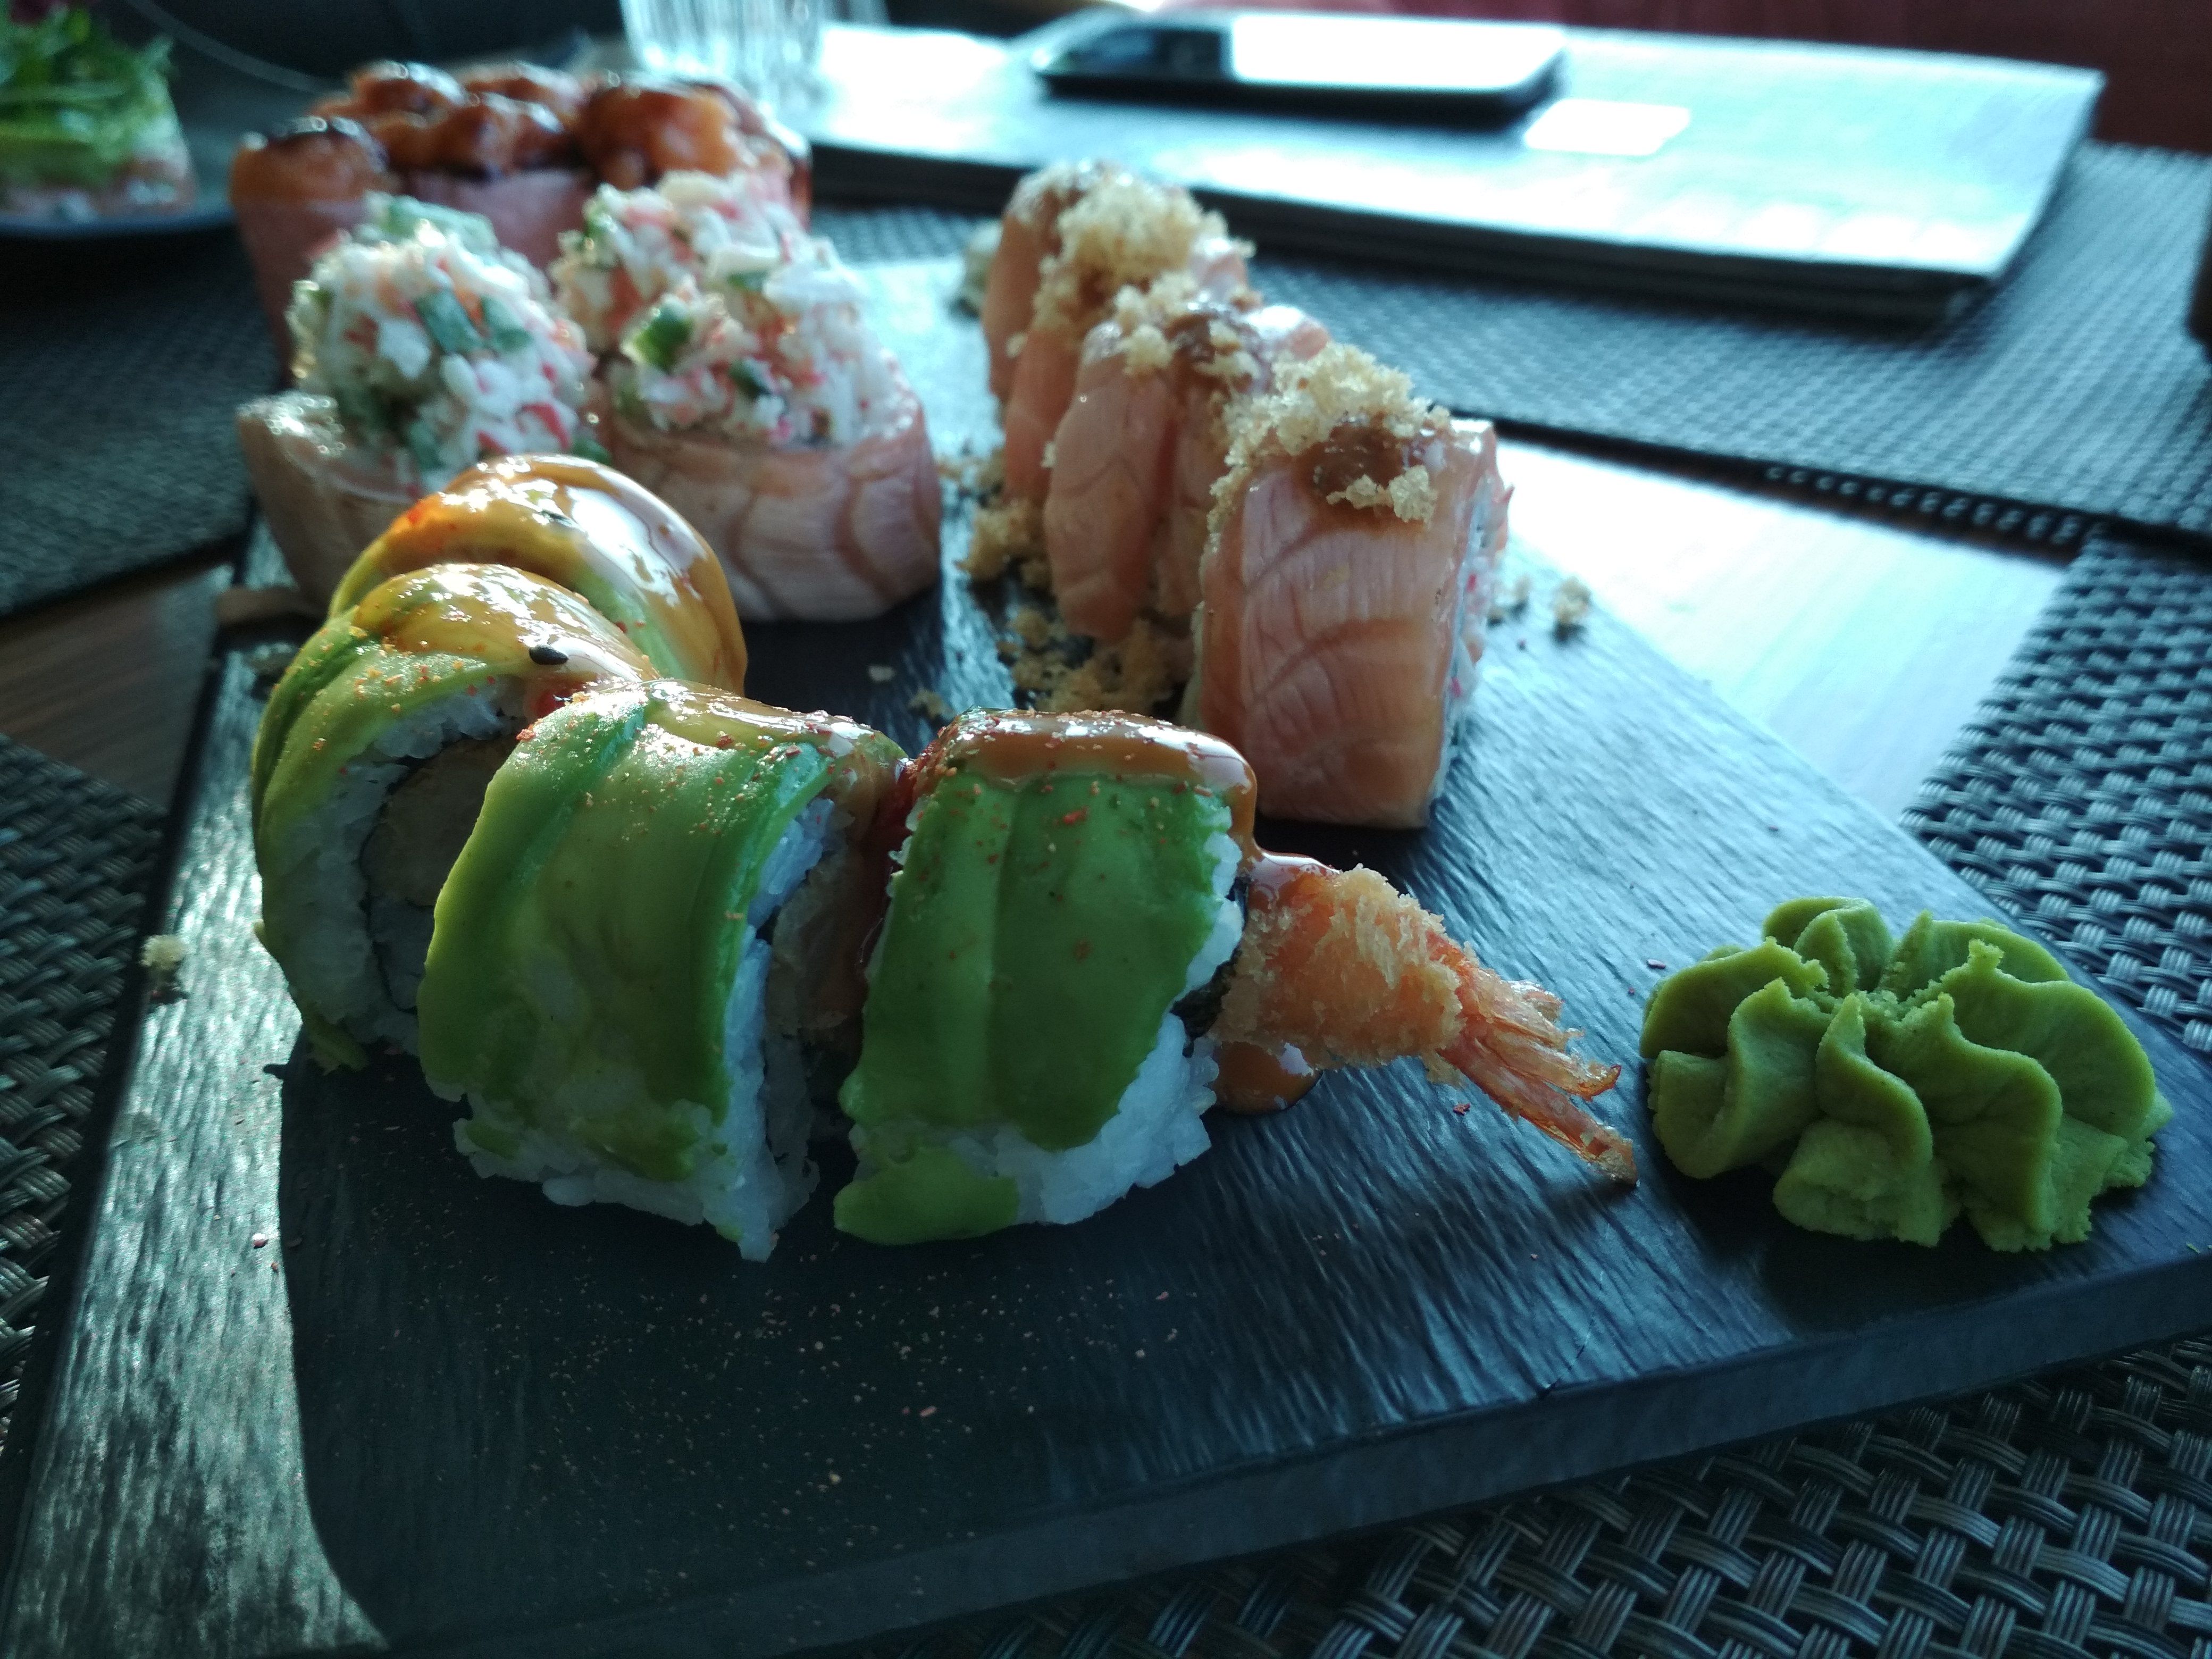 Caption: A close-up photo of a plate with various sushi rolls, focusing on four rolls with avocado and shrimp, with the crispy shrimp tail sticking out of one of them, at SASA, Bulgaria. (Local Guide @DeniGu)